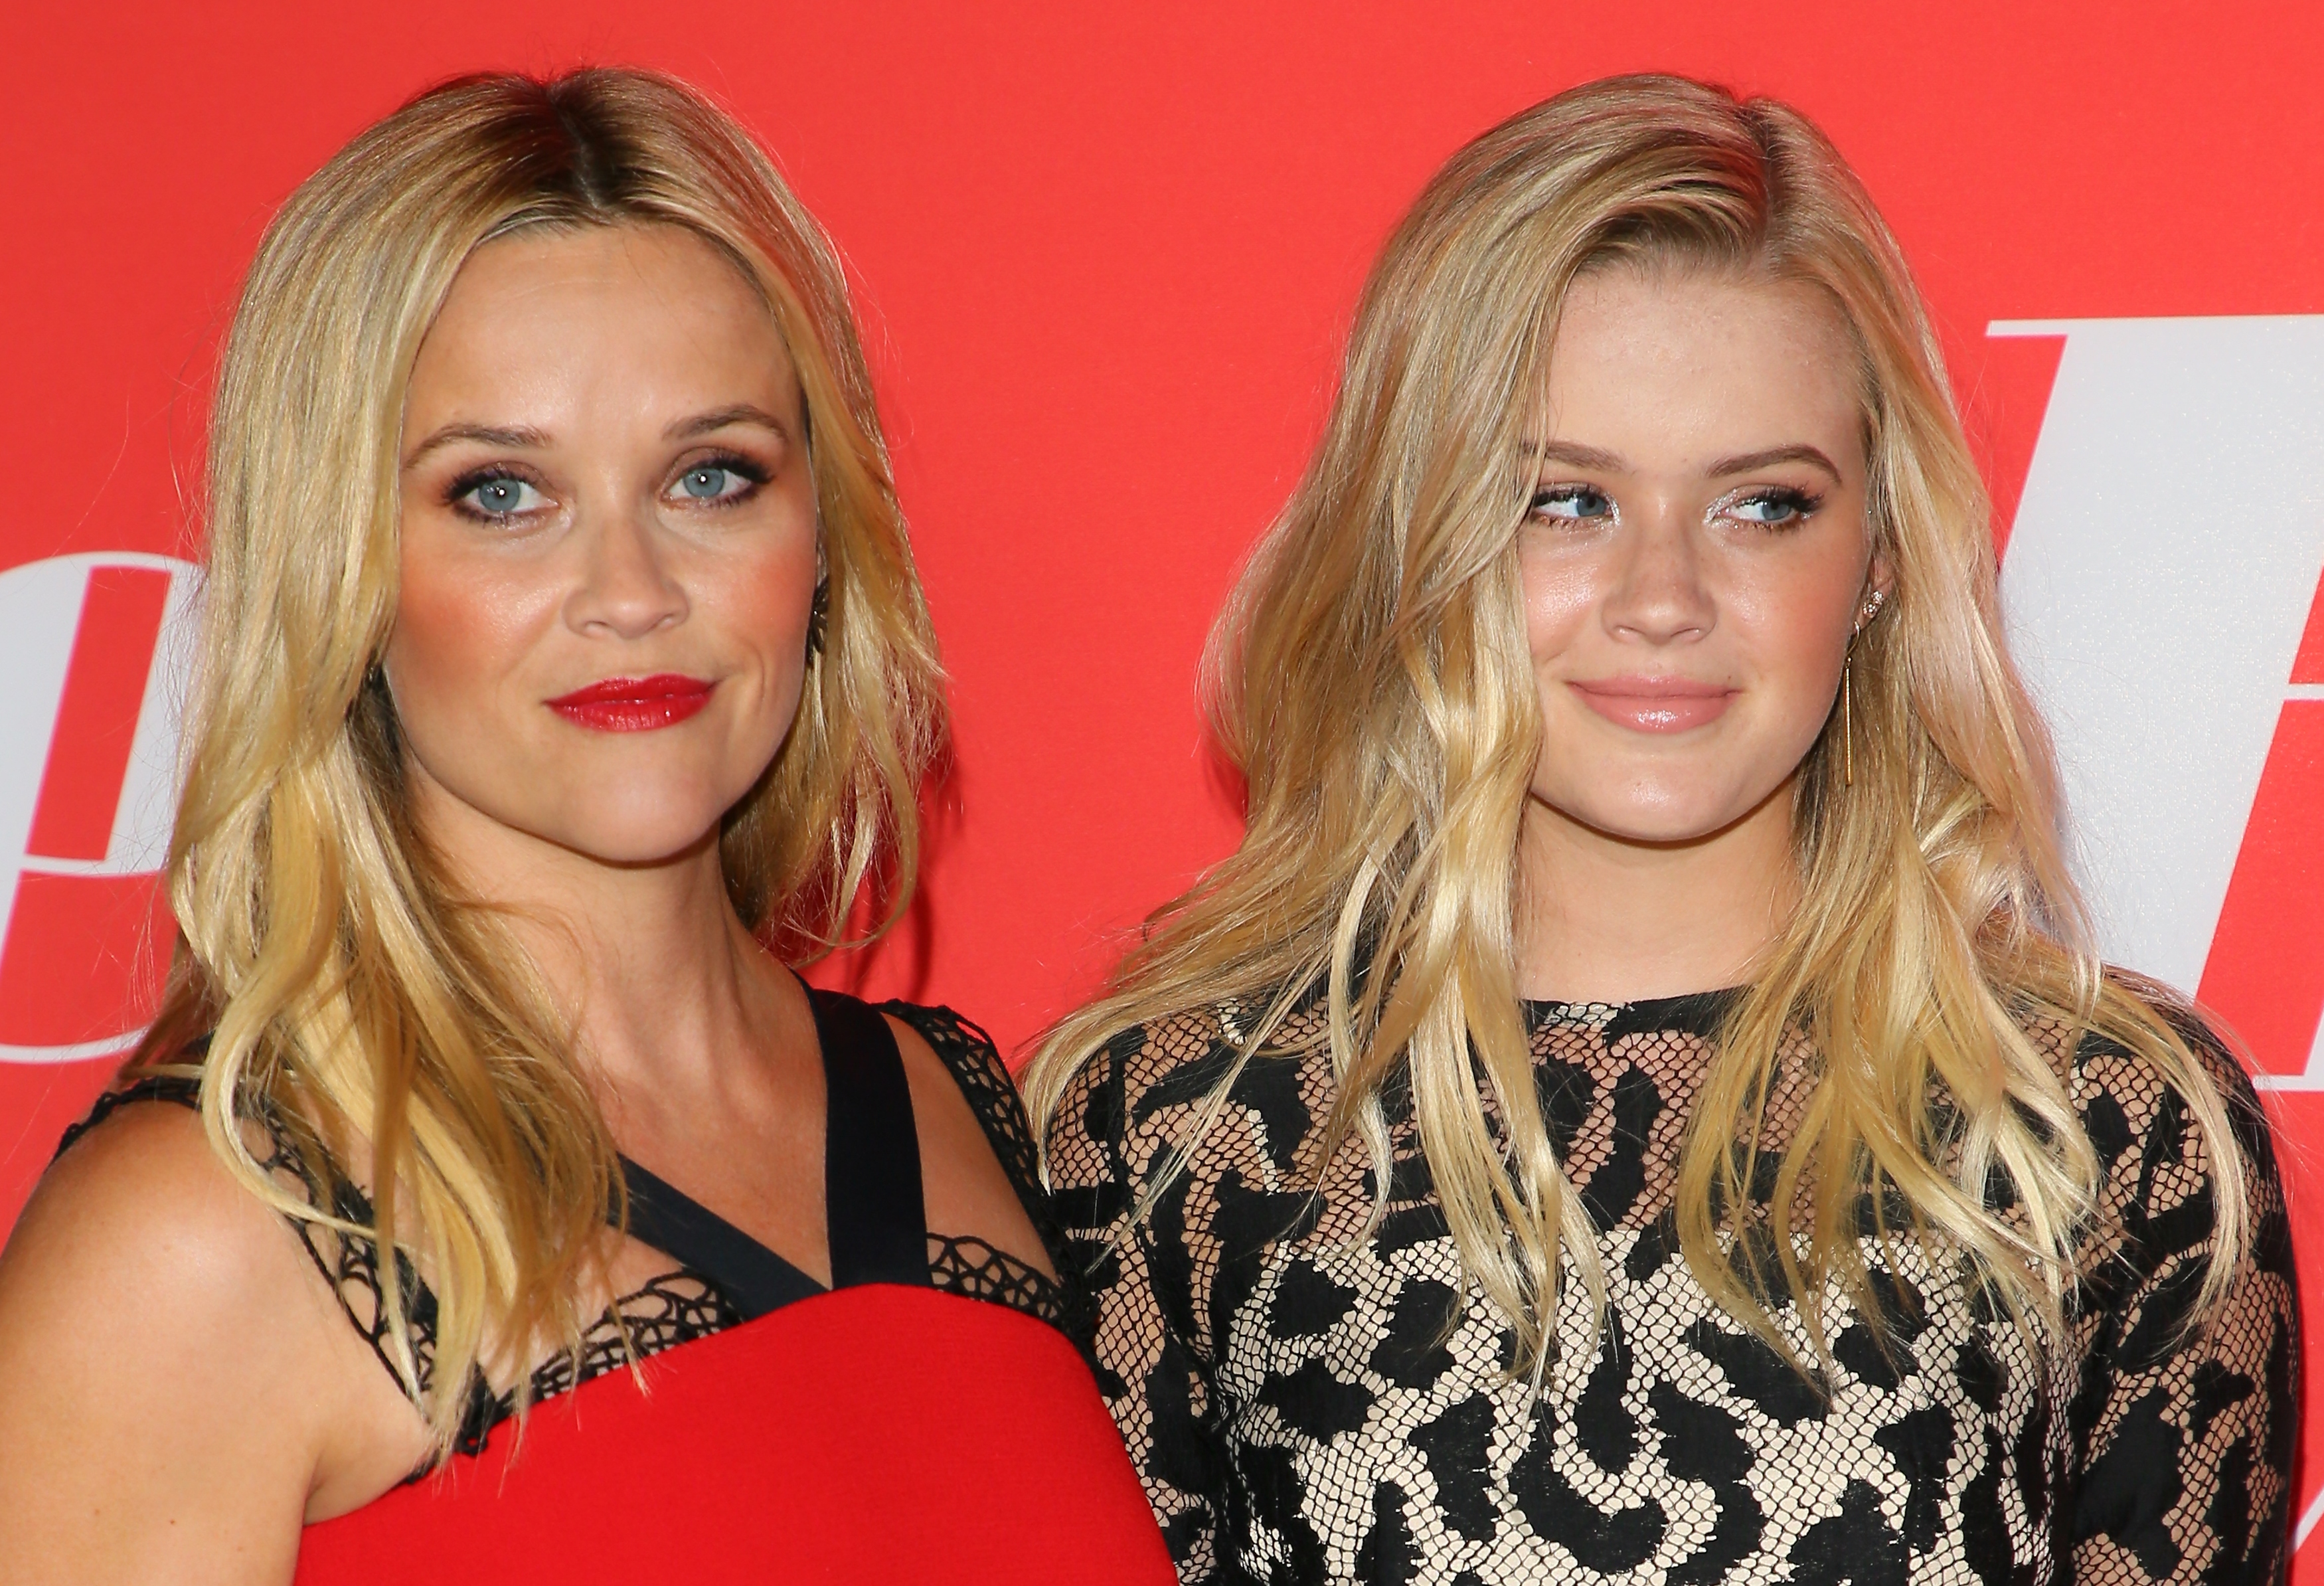 Reese Witherspoon Daughter Ava Phillippe Debutante ?fit=200%2C1